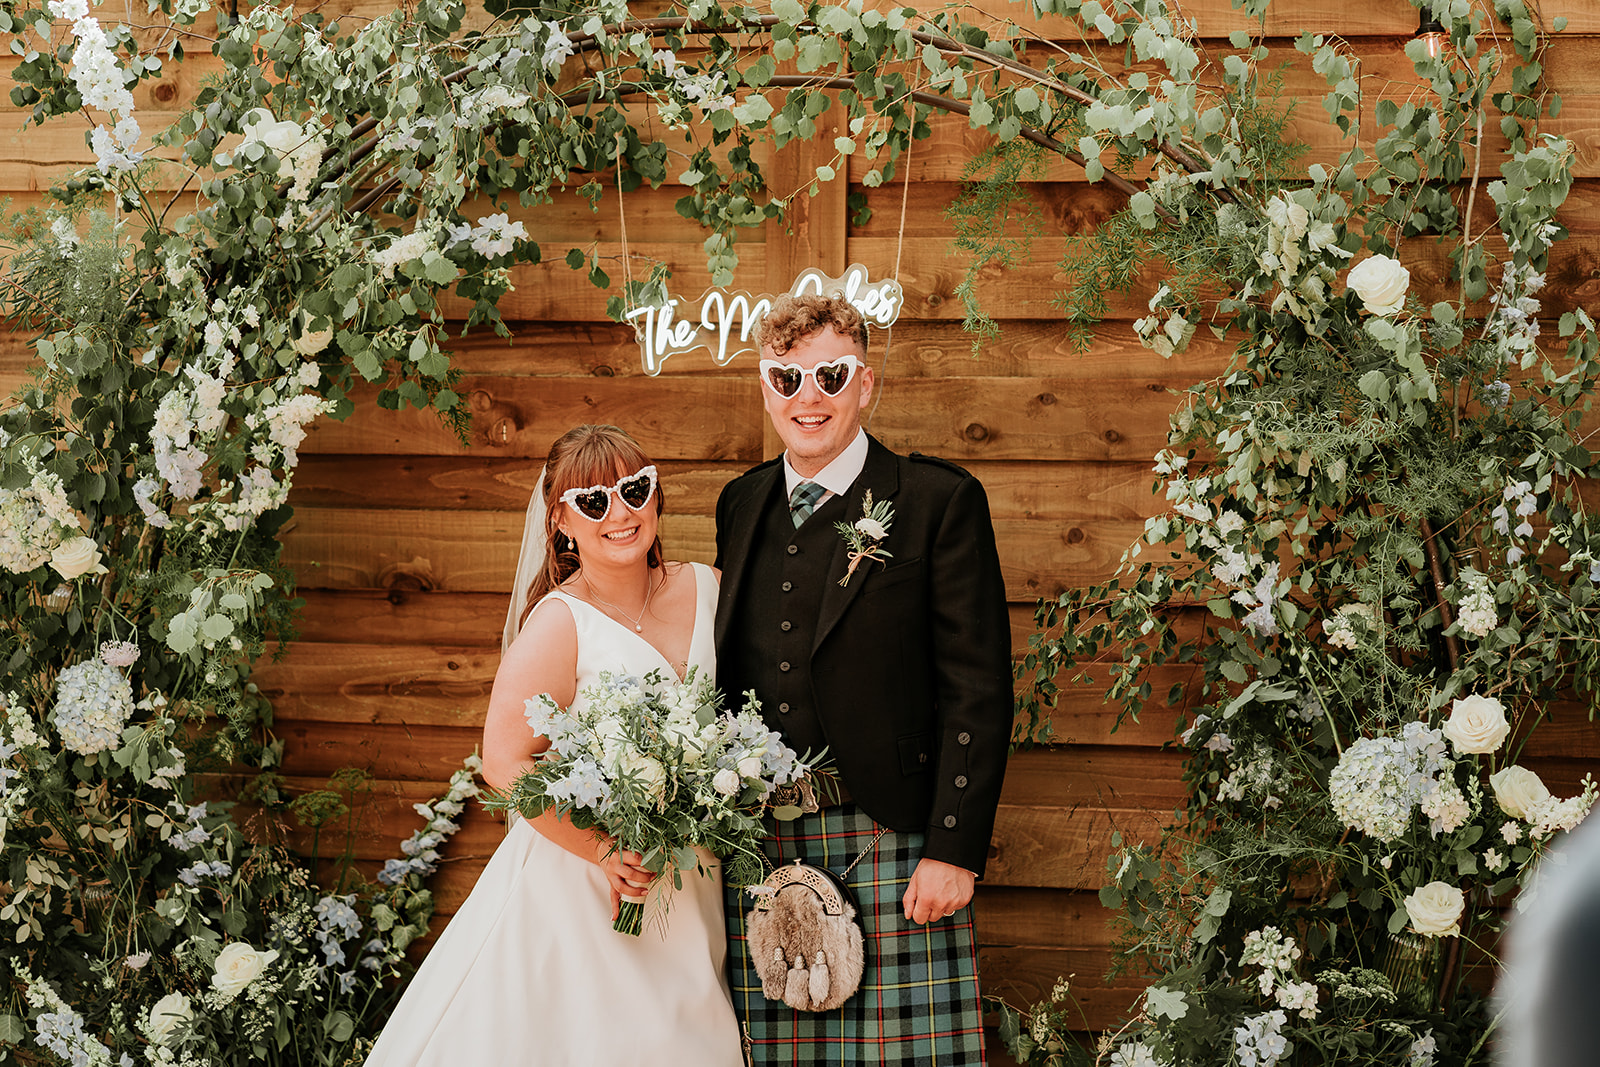 Couple standing in front of wooden wall for their rustic wedding at Elrick House, Scotland